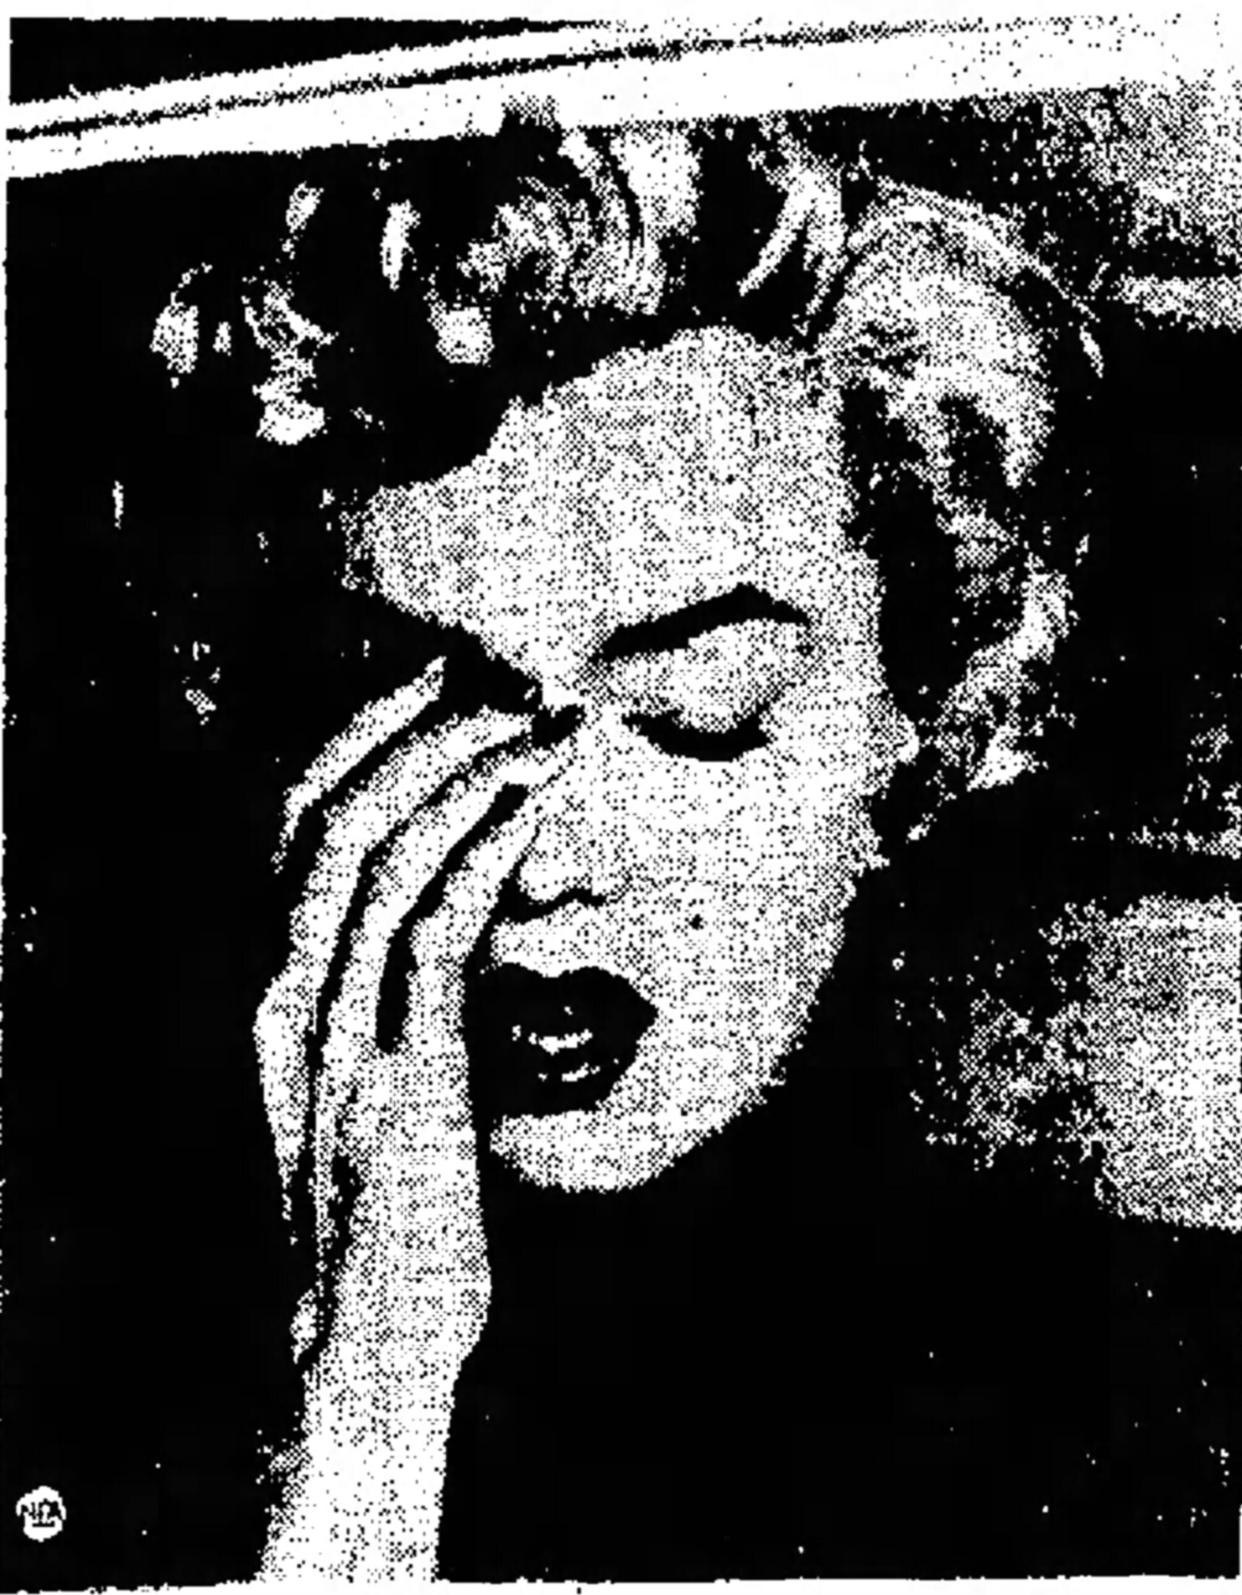 Marilyn Monroe January 1961 newspaper clipping.